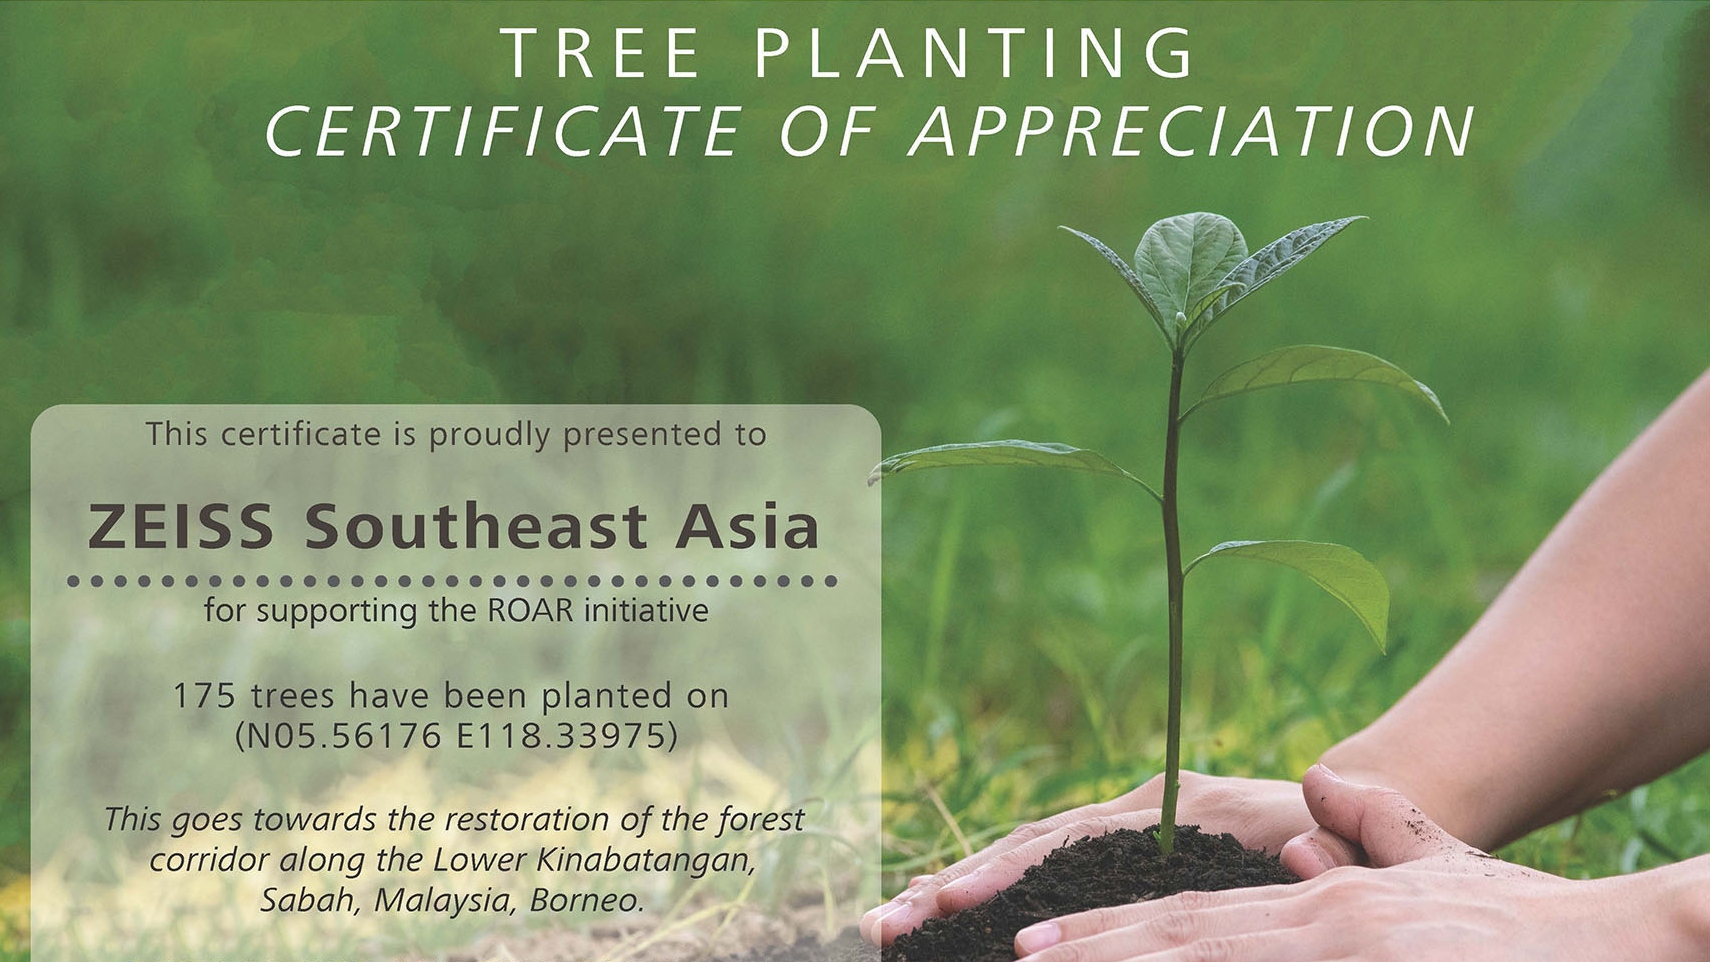 Image of tree planting certificate of appreciation from ZEISS Southeast Asia